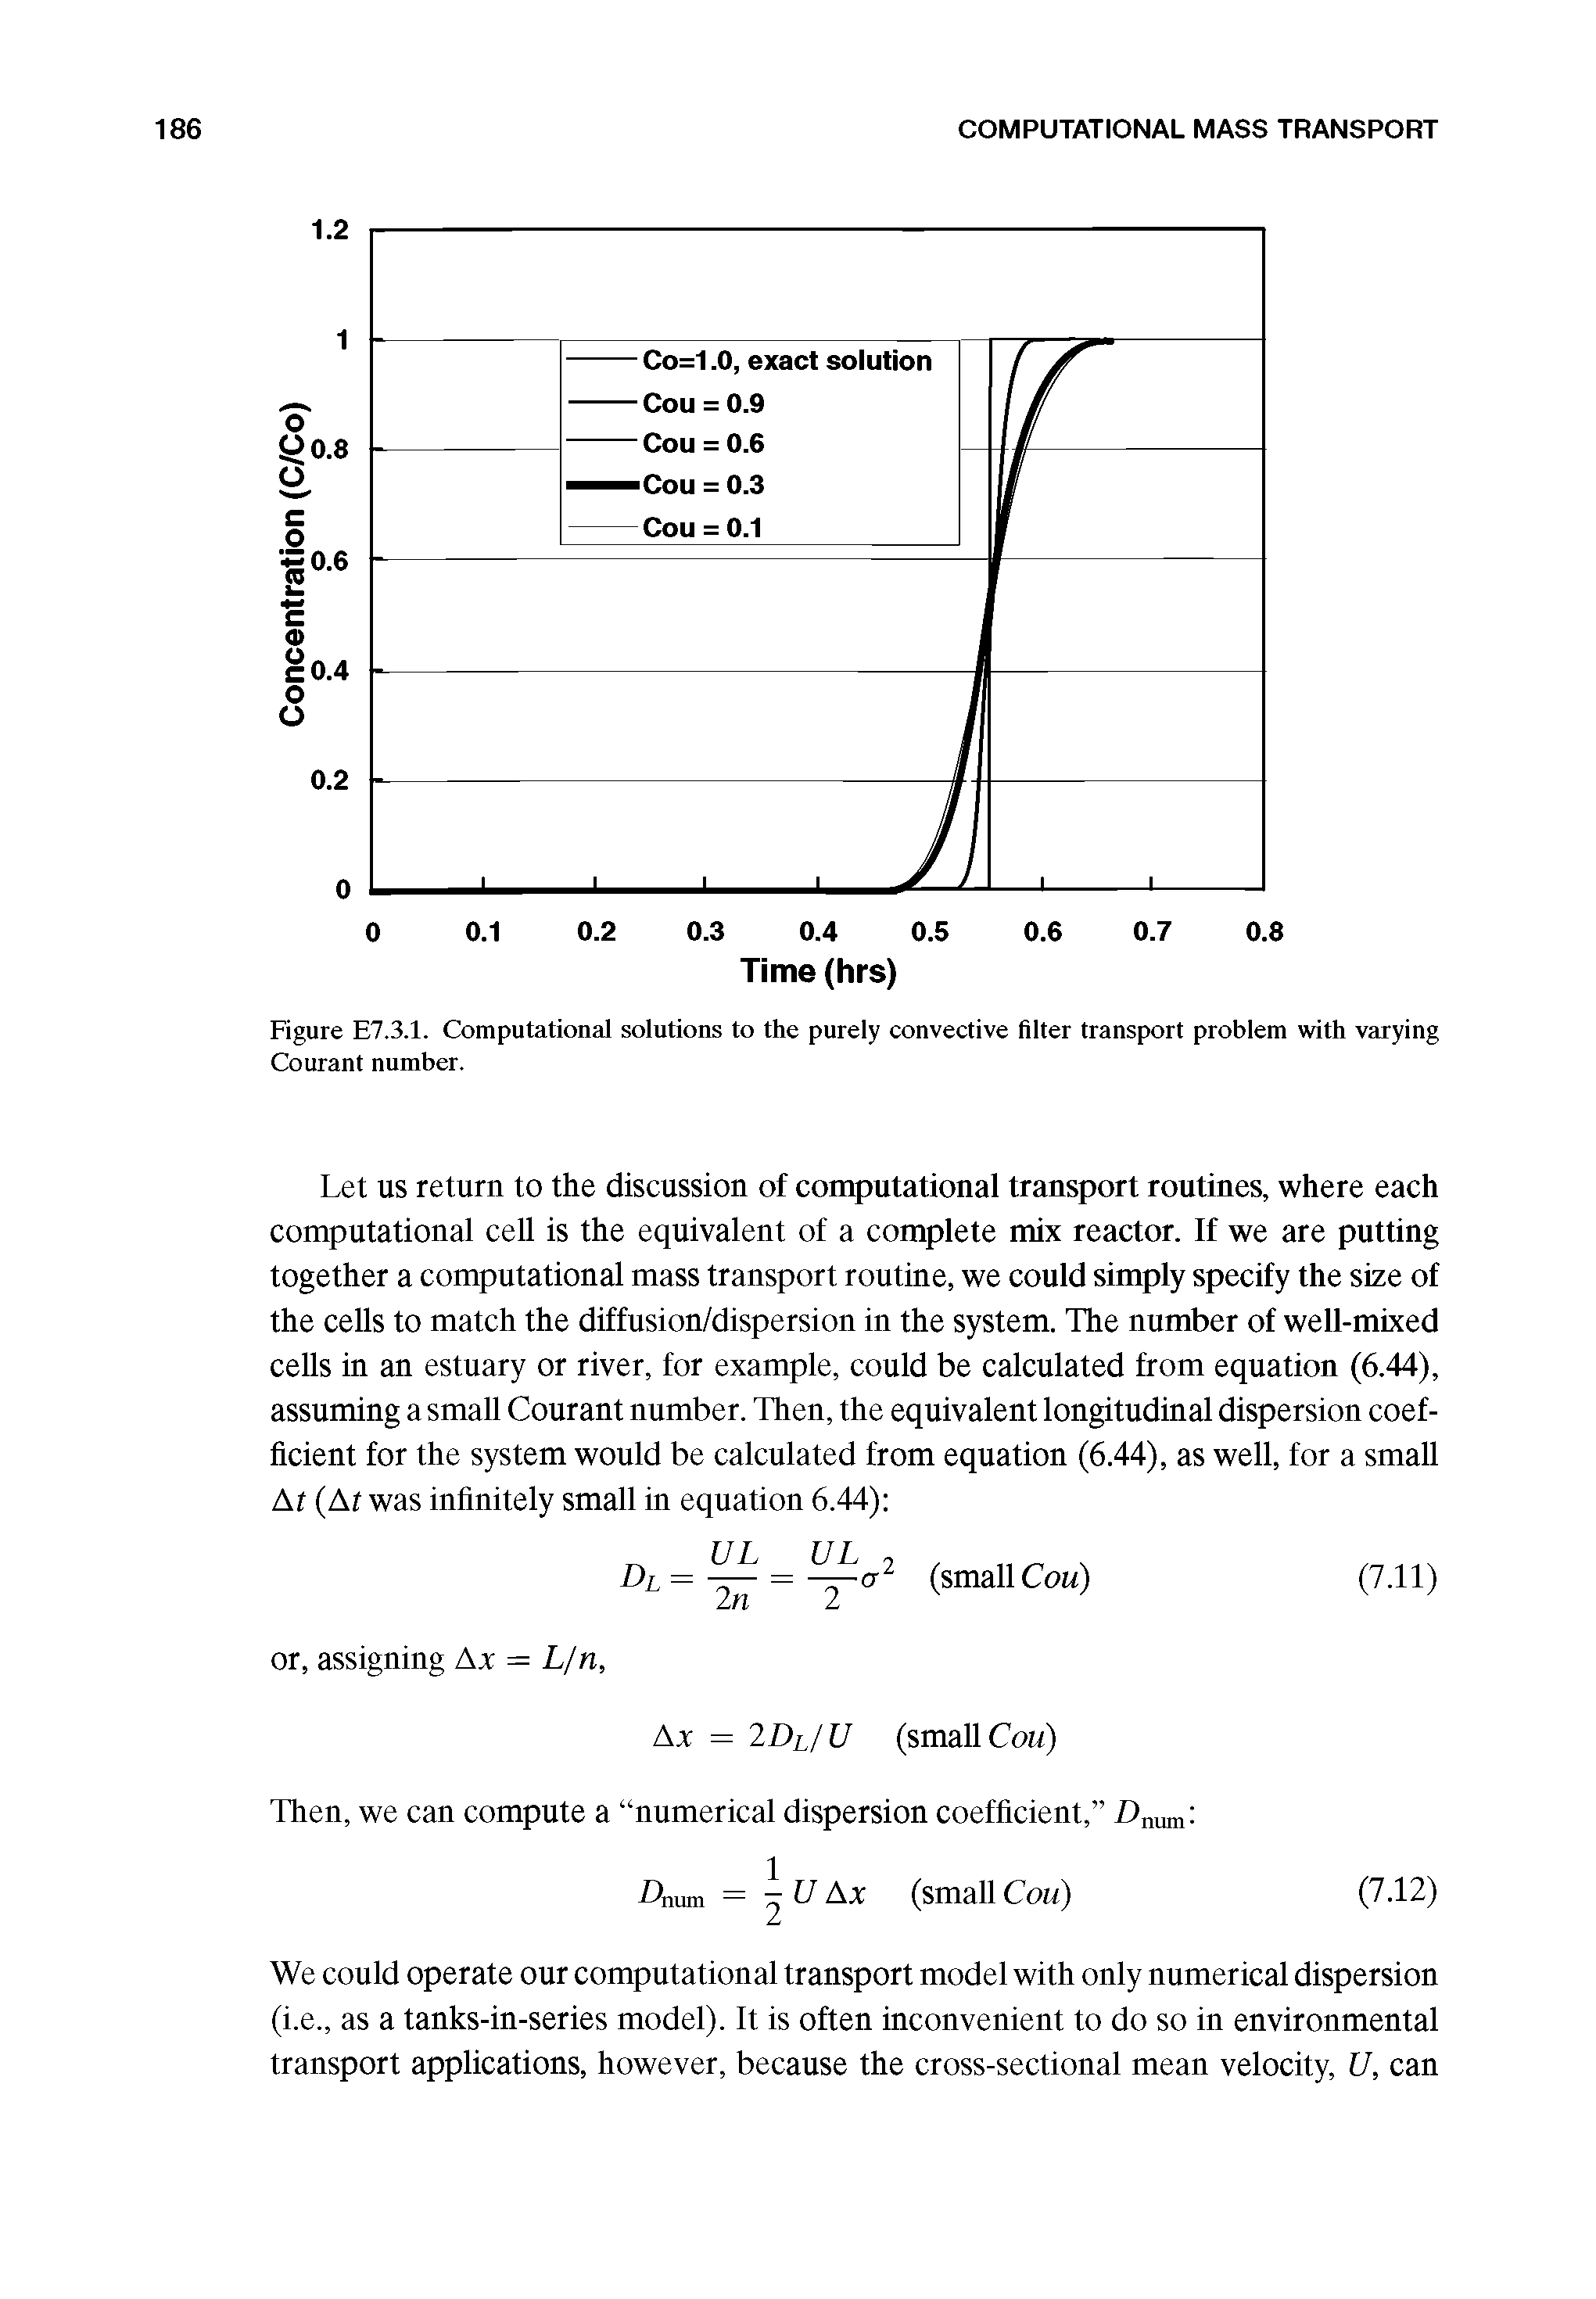 Figure E7.3.1. Computational solutions to the purely convective filter transport problem with varying Courant number.